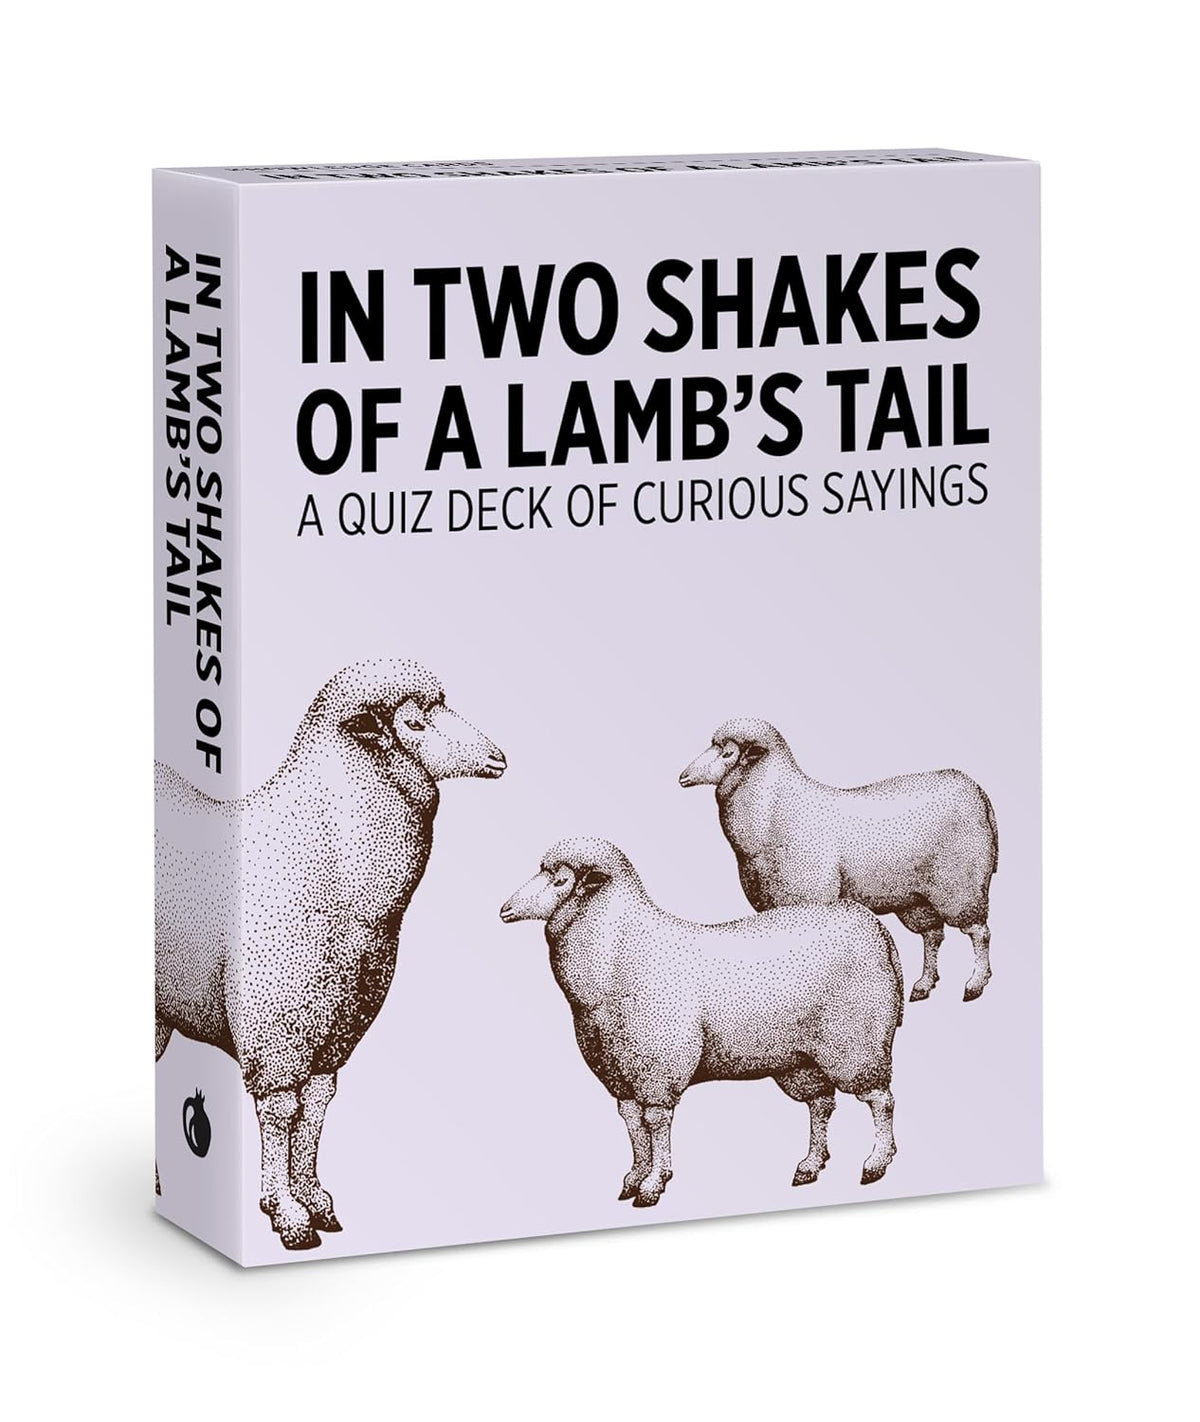 In Two Shakes of a Lamb’s Tail: A Quiz Deck of Curious Sayings